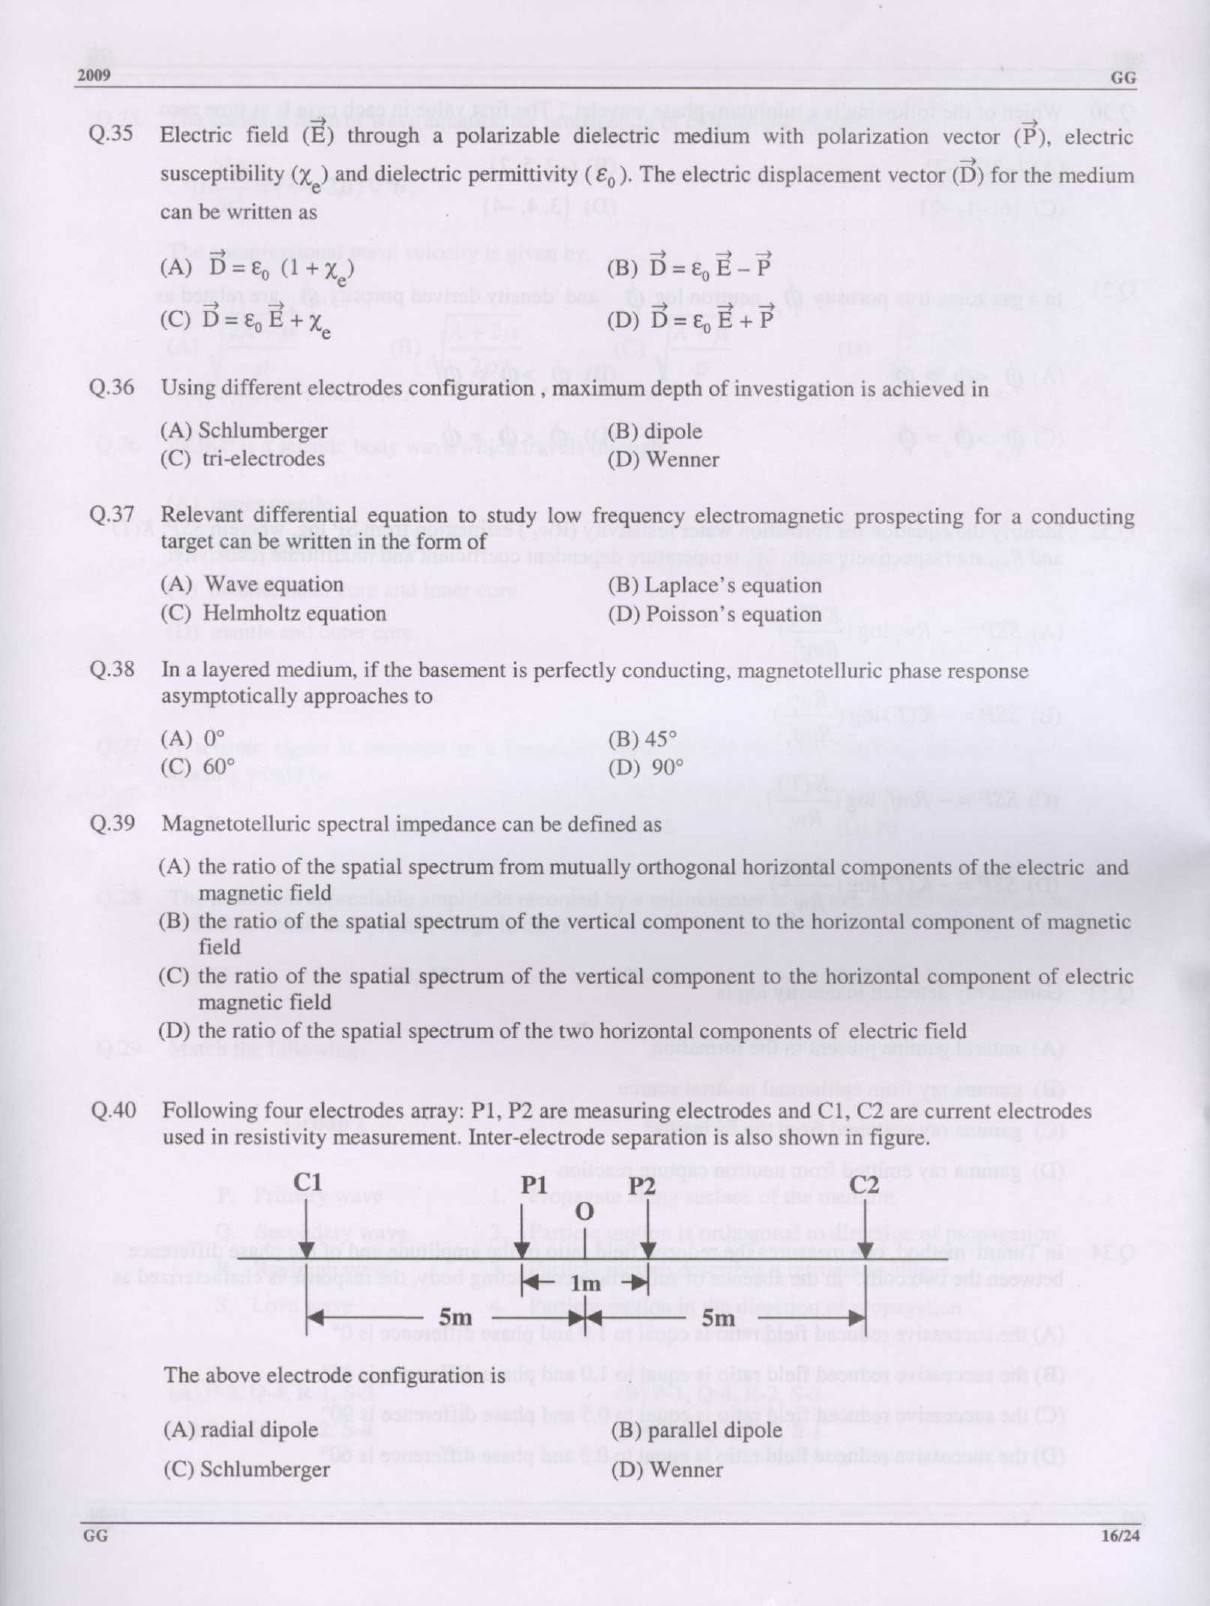 GATE Exam Question Paper 2009 Geology and Geophysics 16